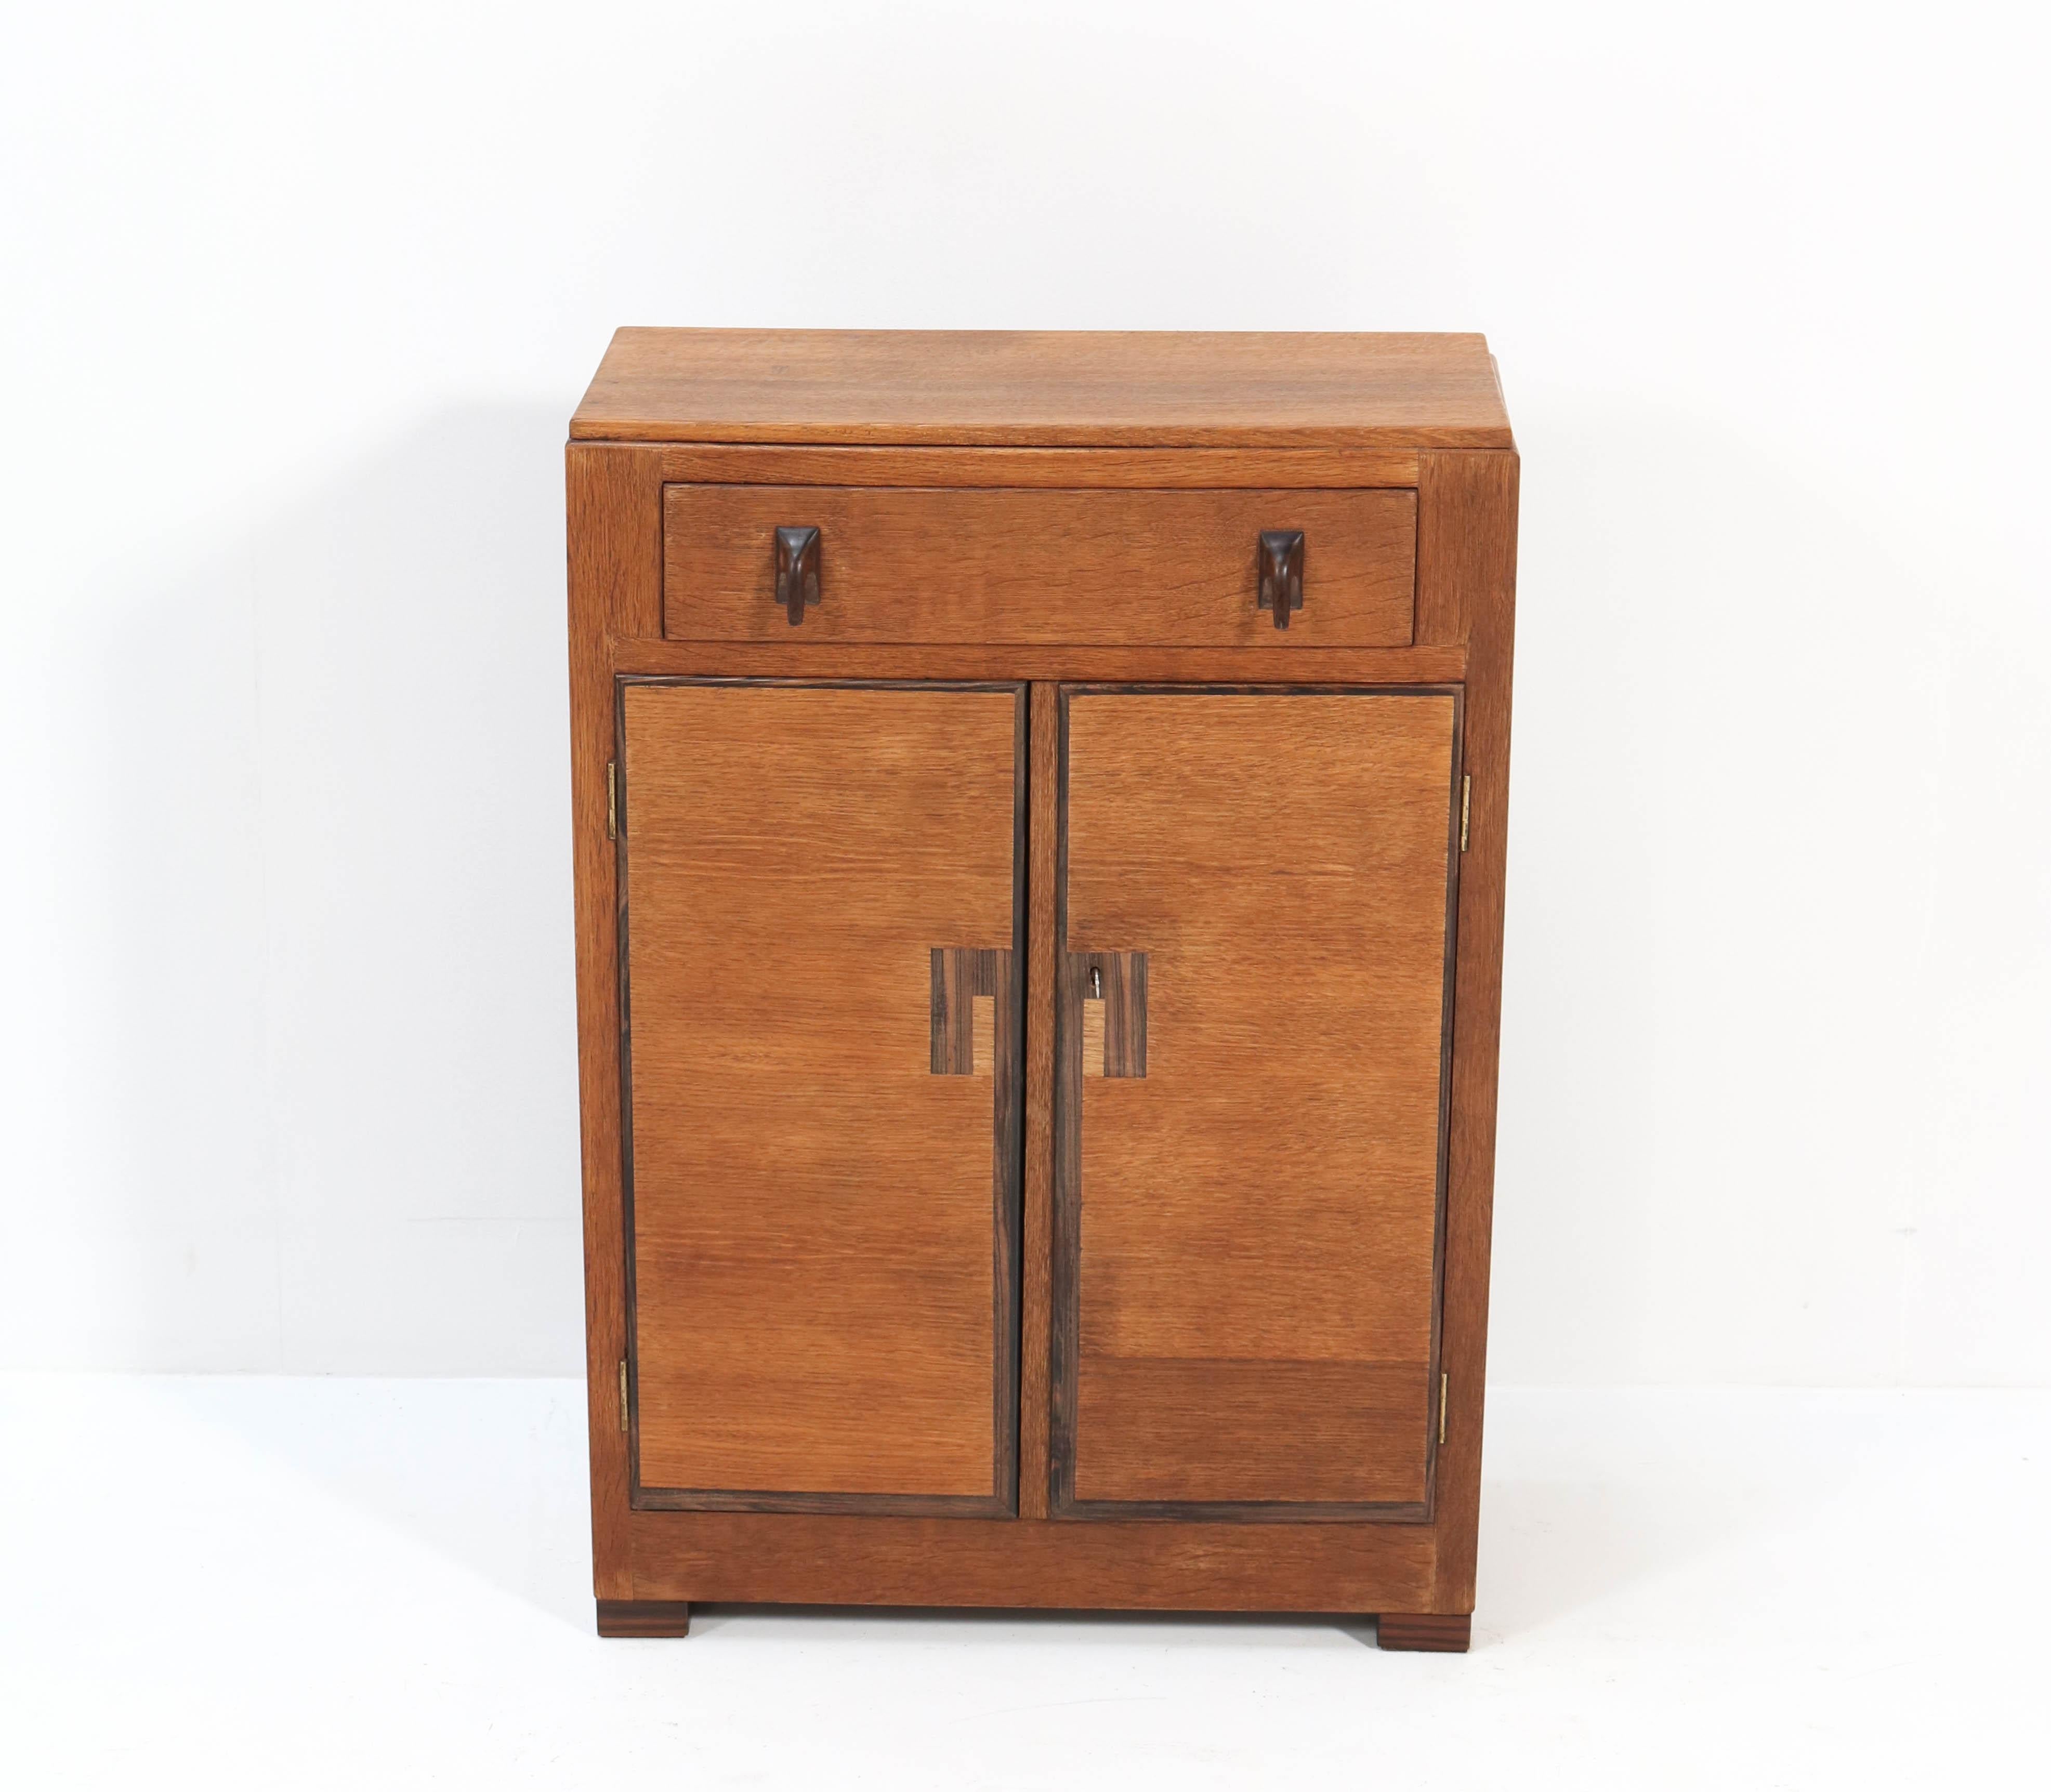 Stunning and rare Art Deco Haagse School cabinet.
Design by Anton Lucas for NV. Meubelkunst Leiden.
Striking Dutch design from the 1920s.
Solid oak with solid Macassar ebony knobs and lining.
In good original condition with minor wear consistent